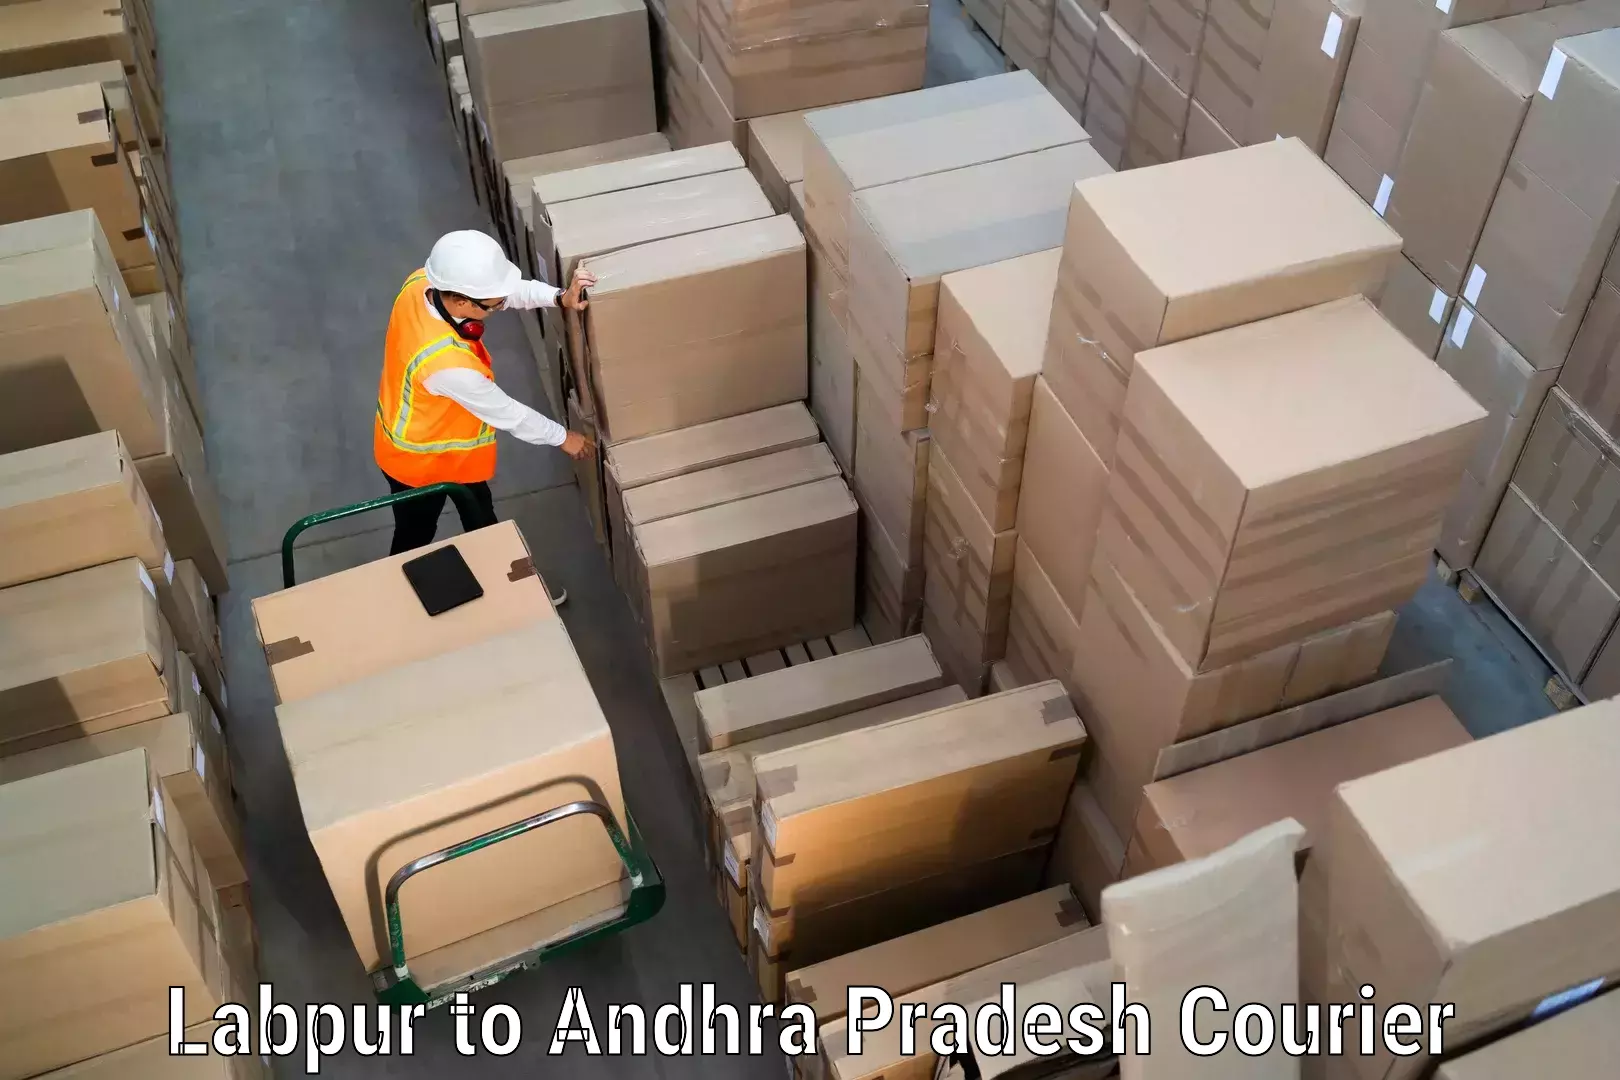 Cost-effective courier solutions Labpur to Guntur